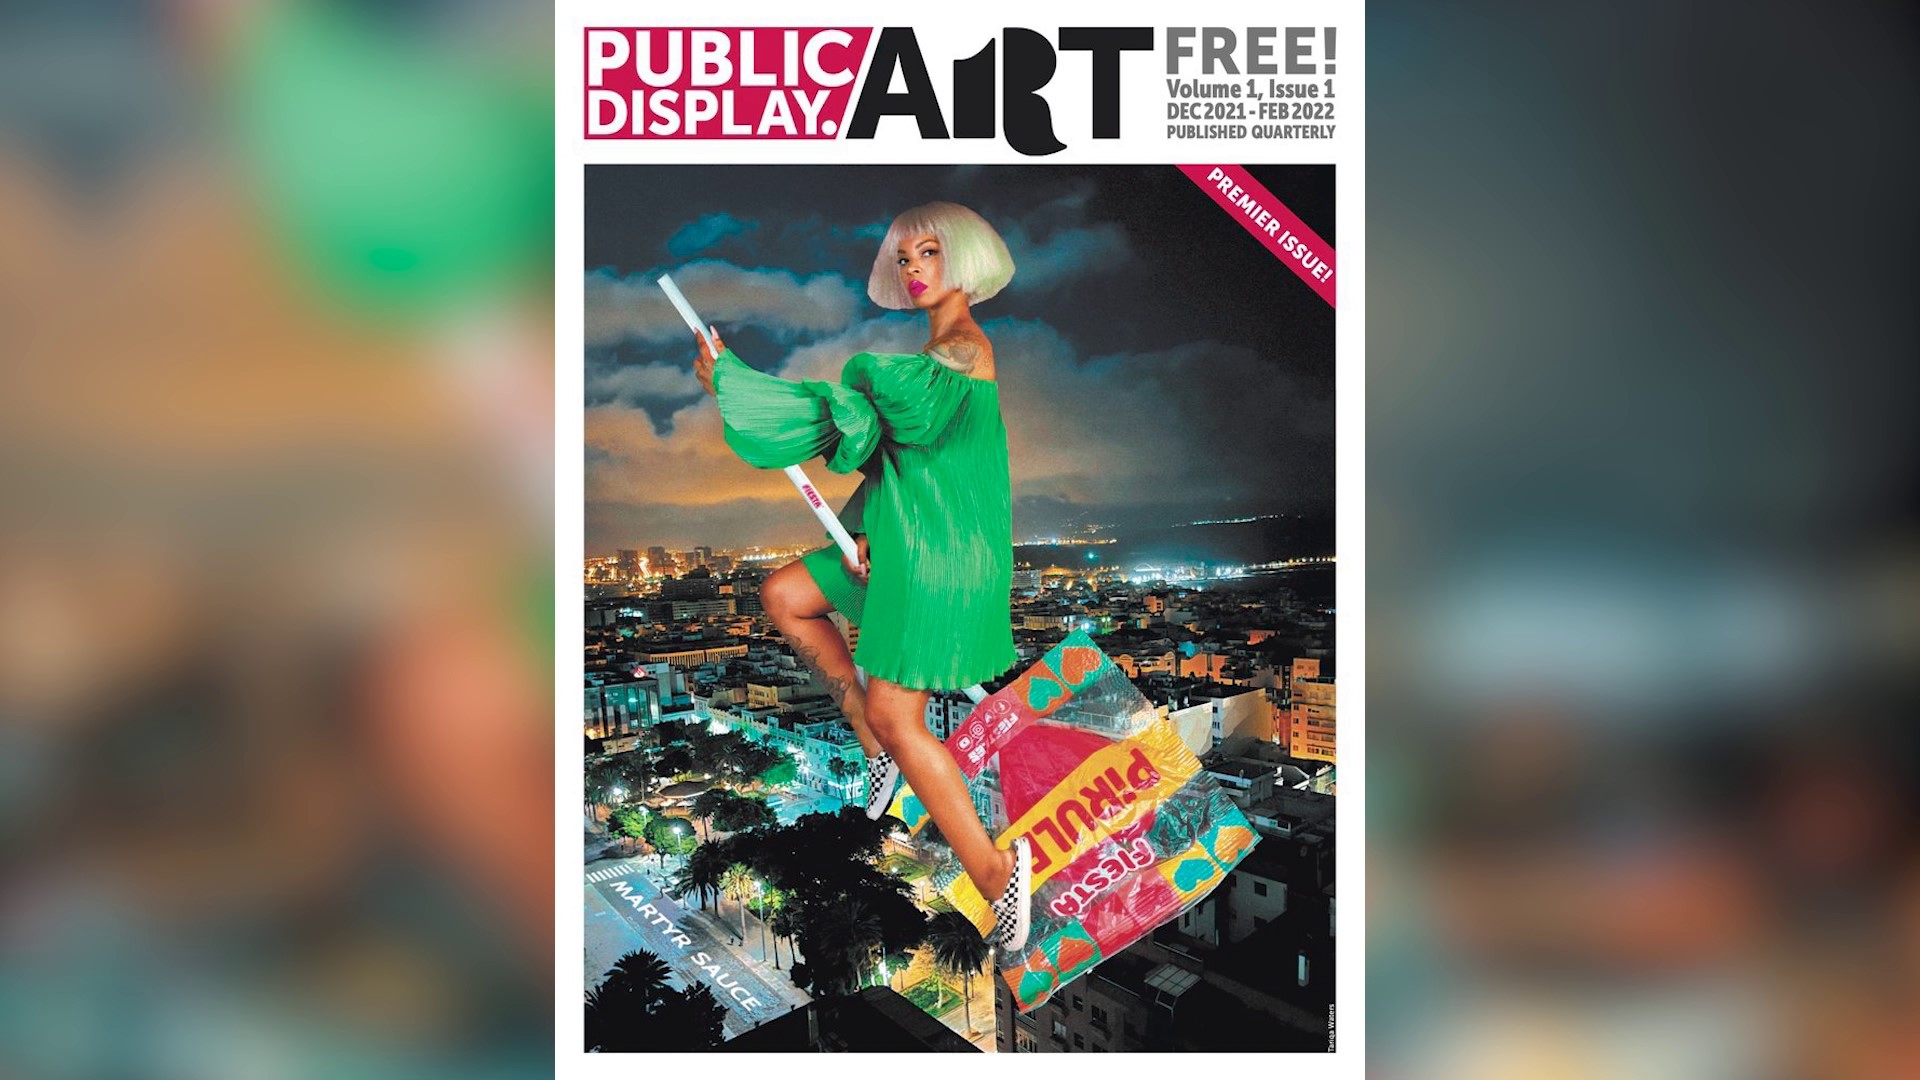 Public Display Art is an art newspaper that aims to promote local artist. #k5evening